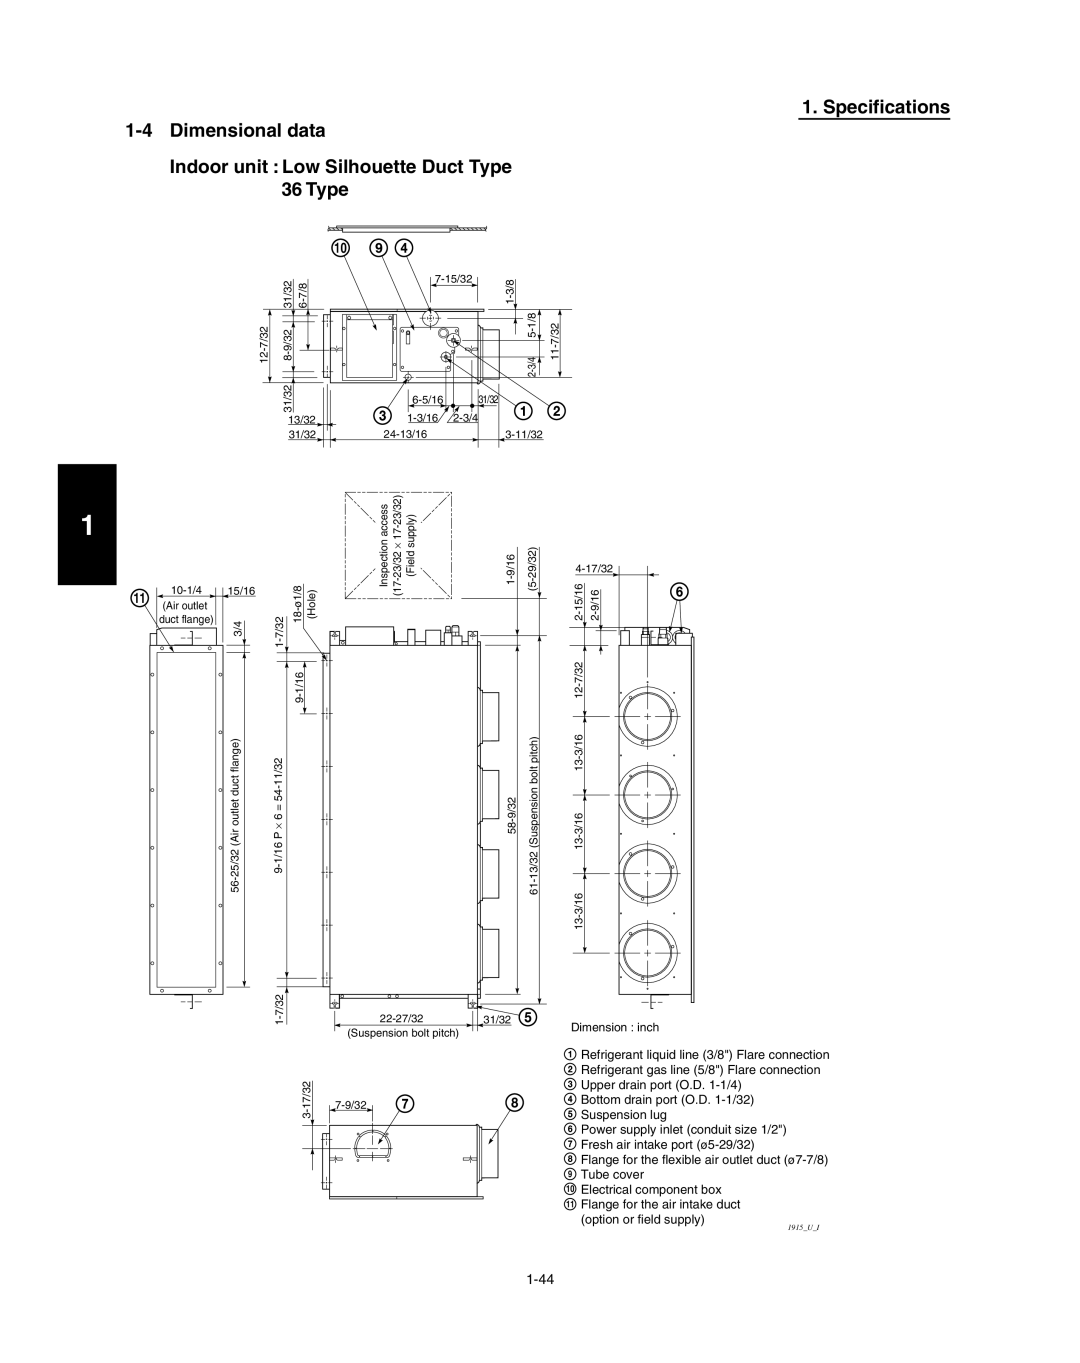 Panasonic R410A service manual Indoor unit : Low Silhouette Duct Type 36 Type, Specifications 1-4Dimensional data 